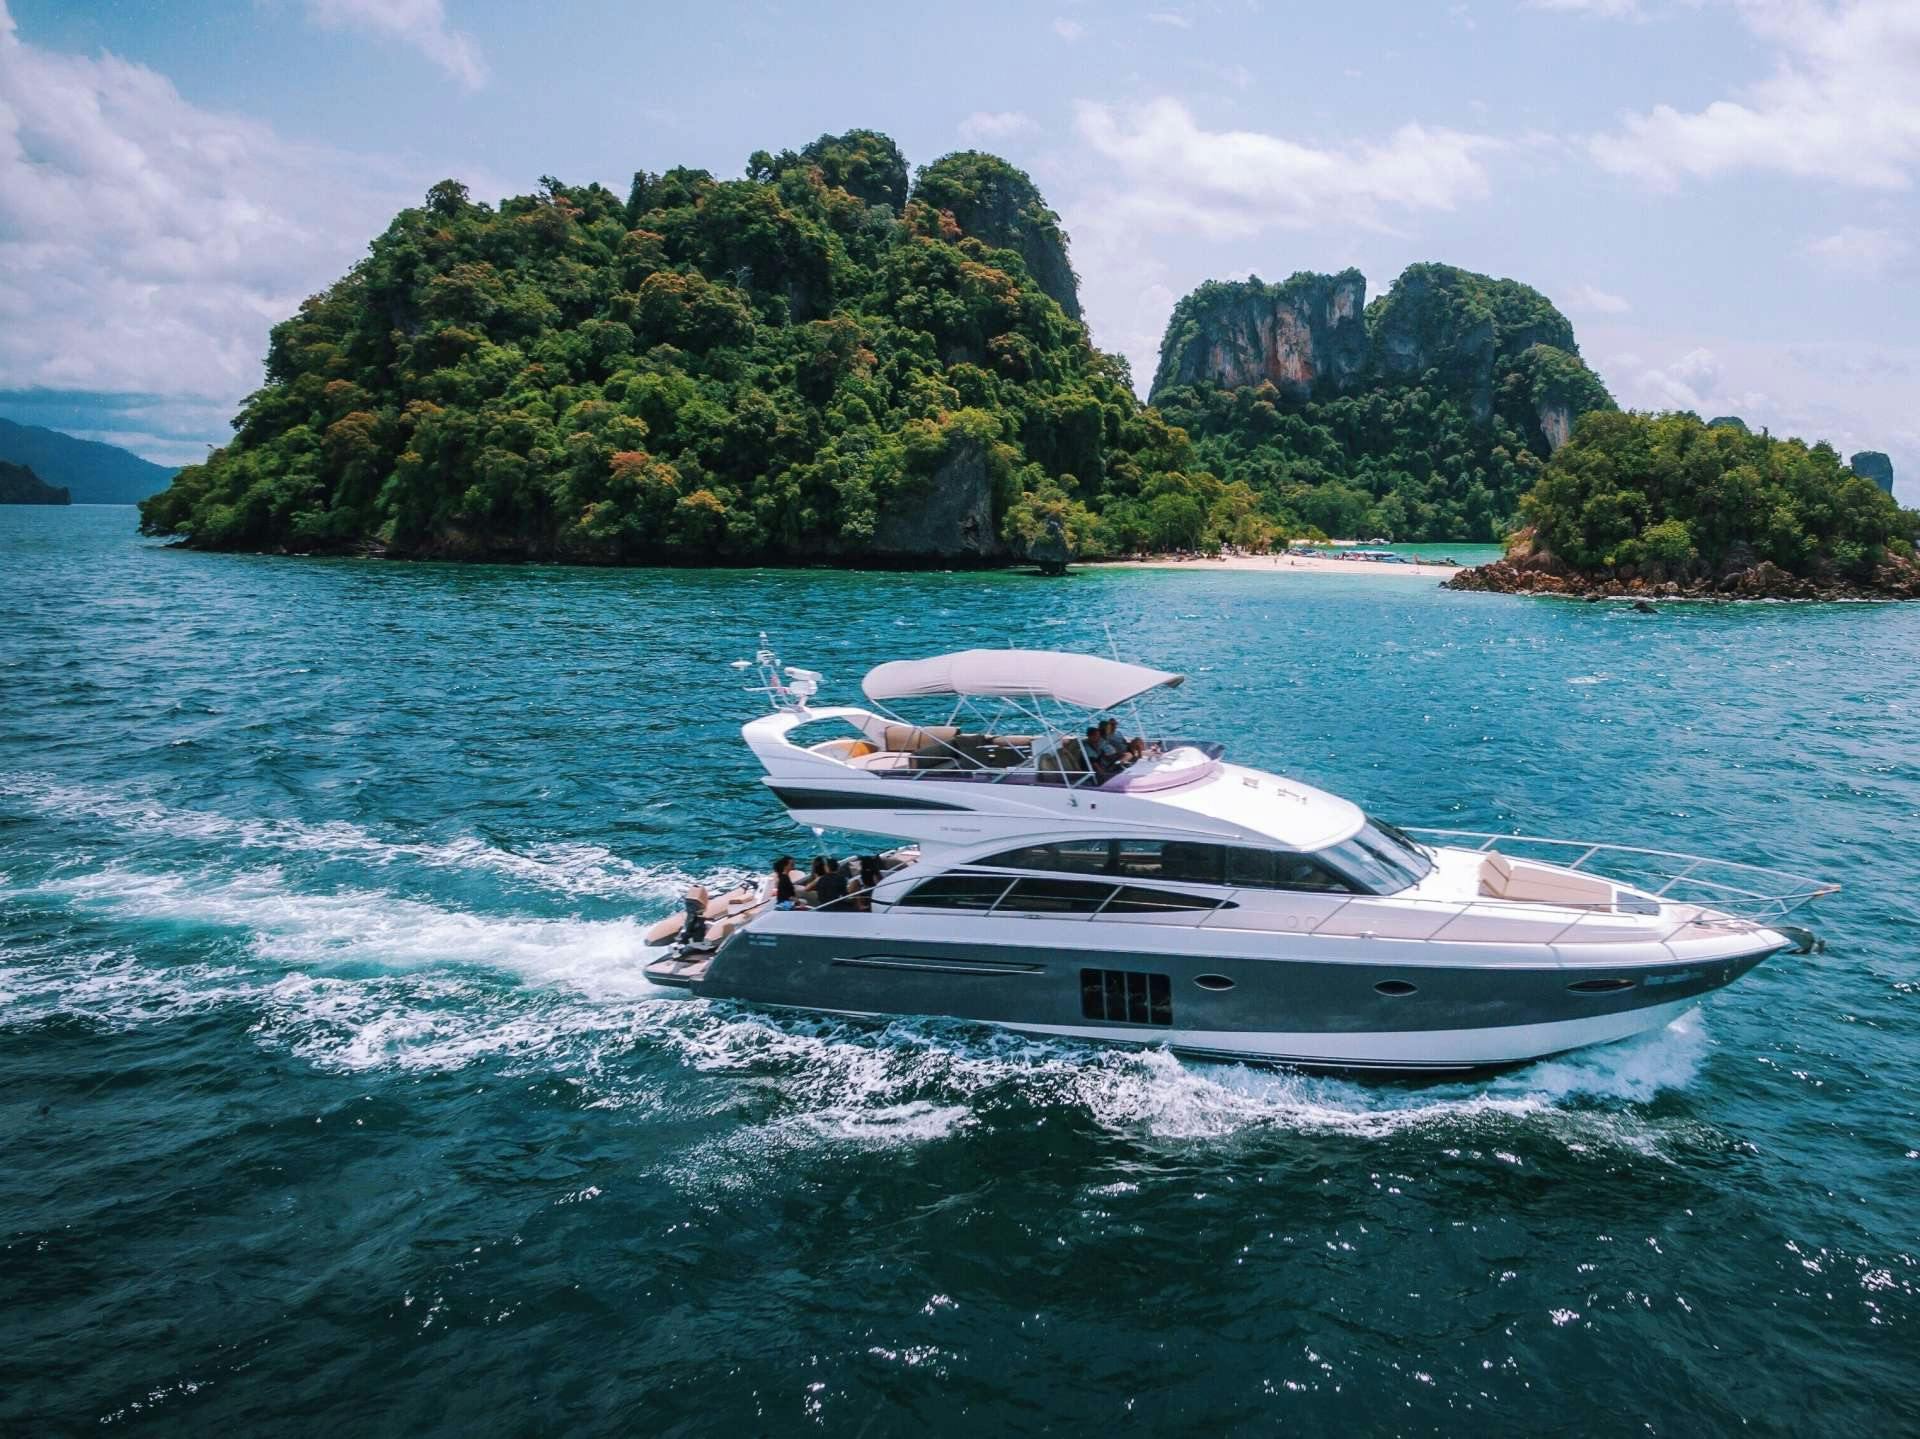 mayavee - Yacht Charter Thailand & Boat hire in SE Asia 1